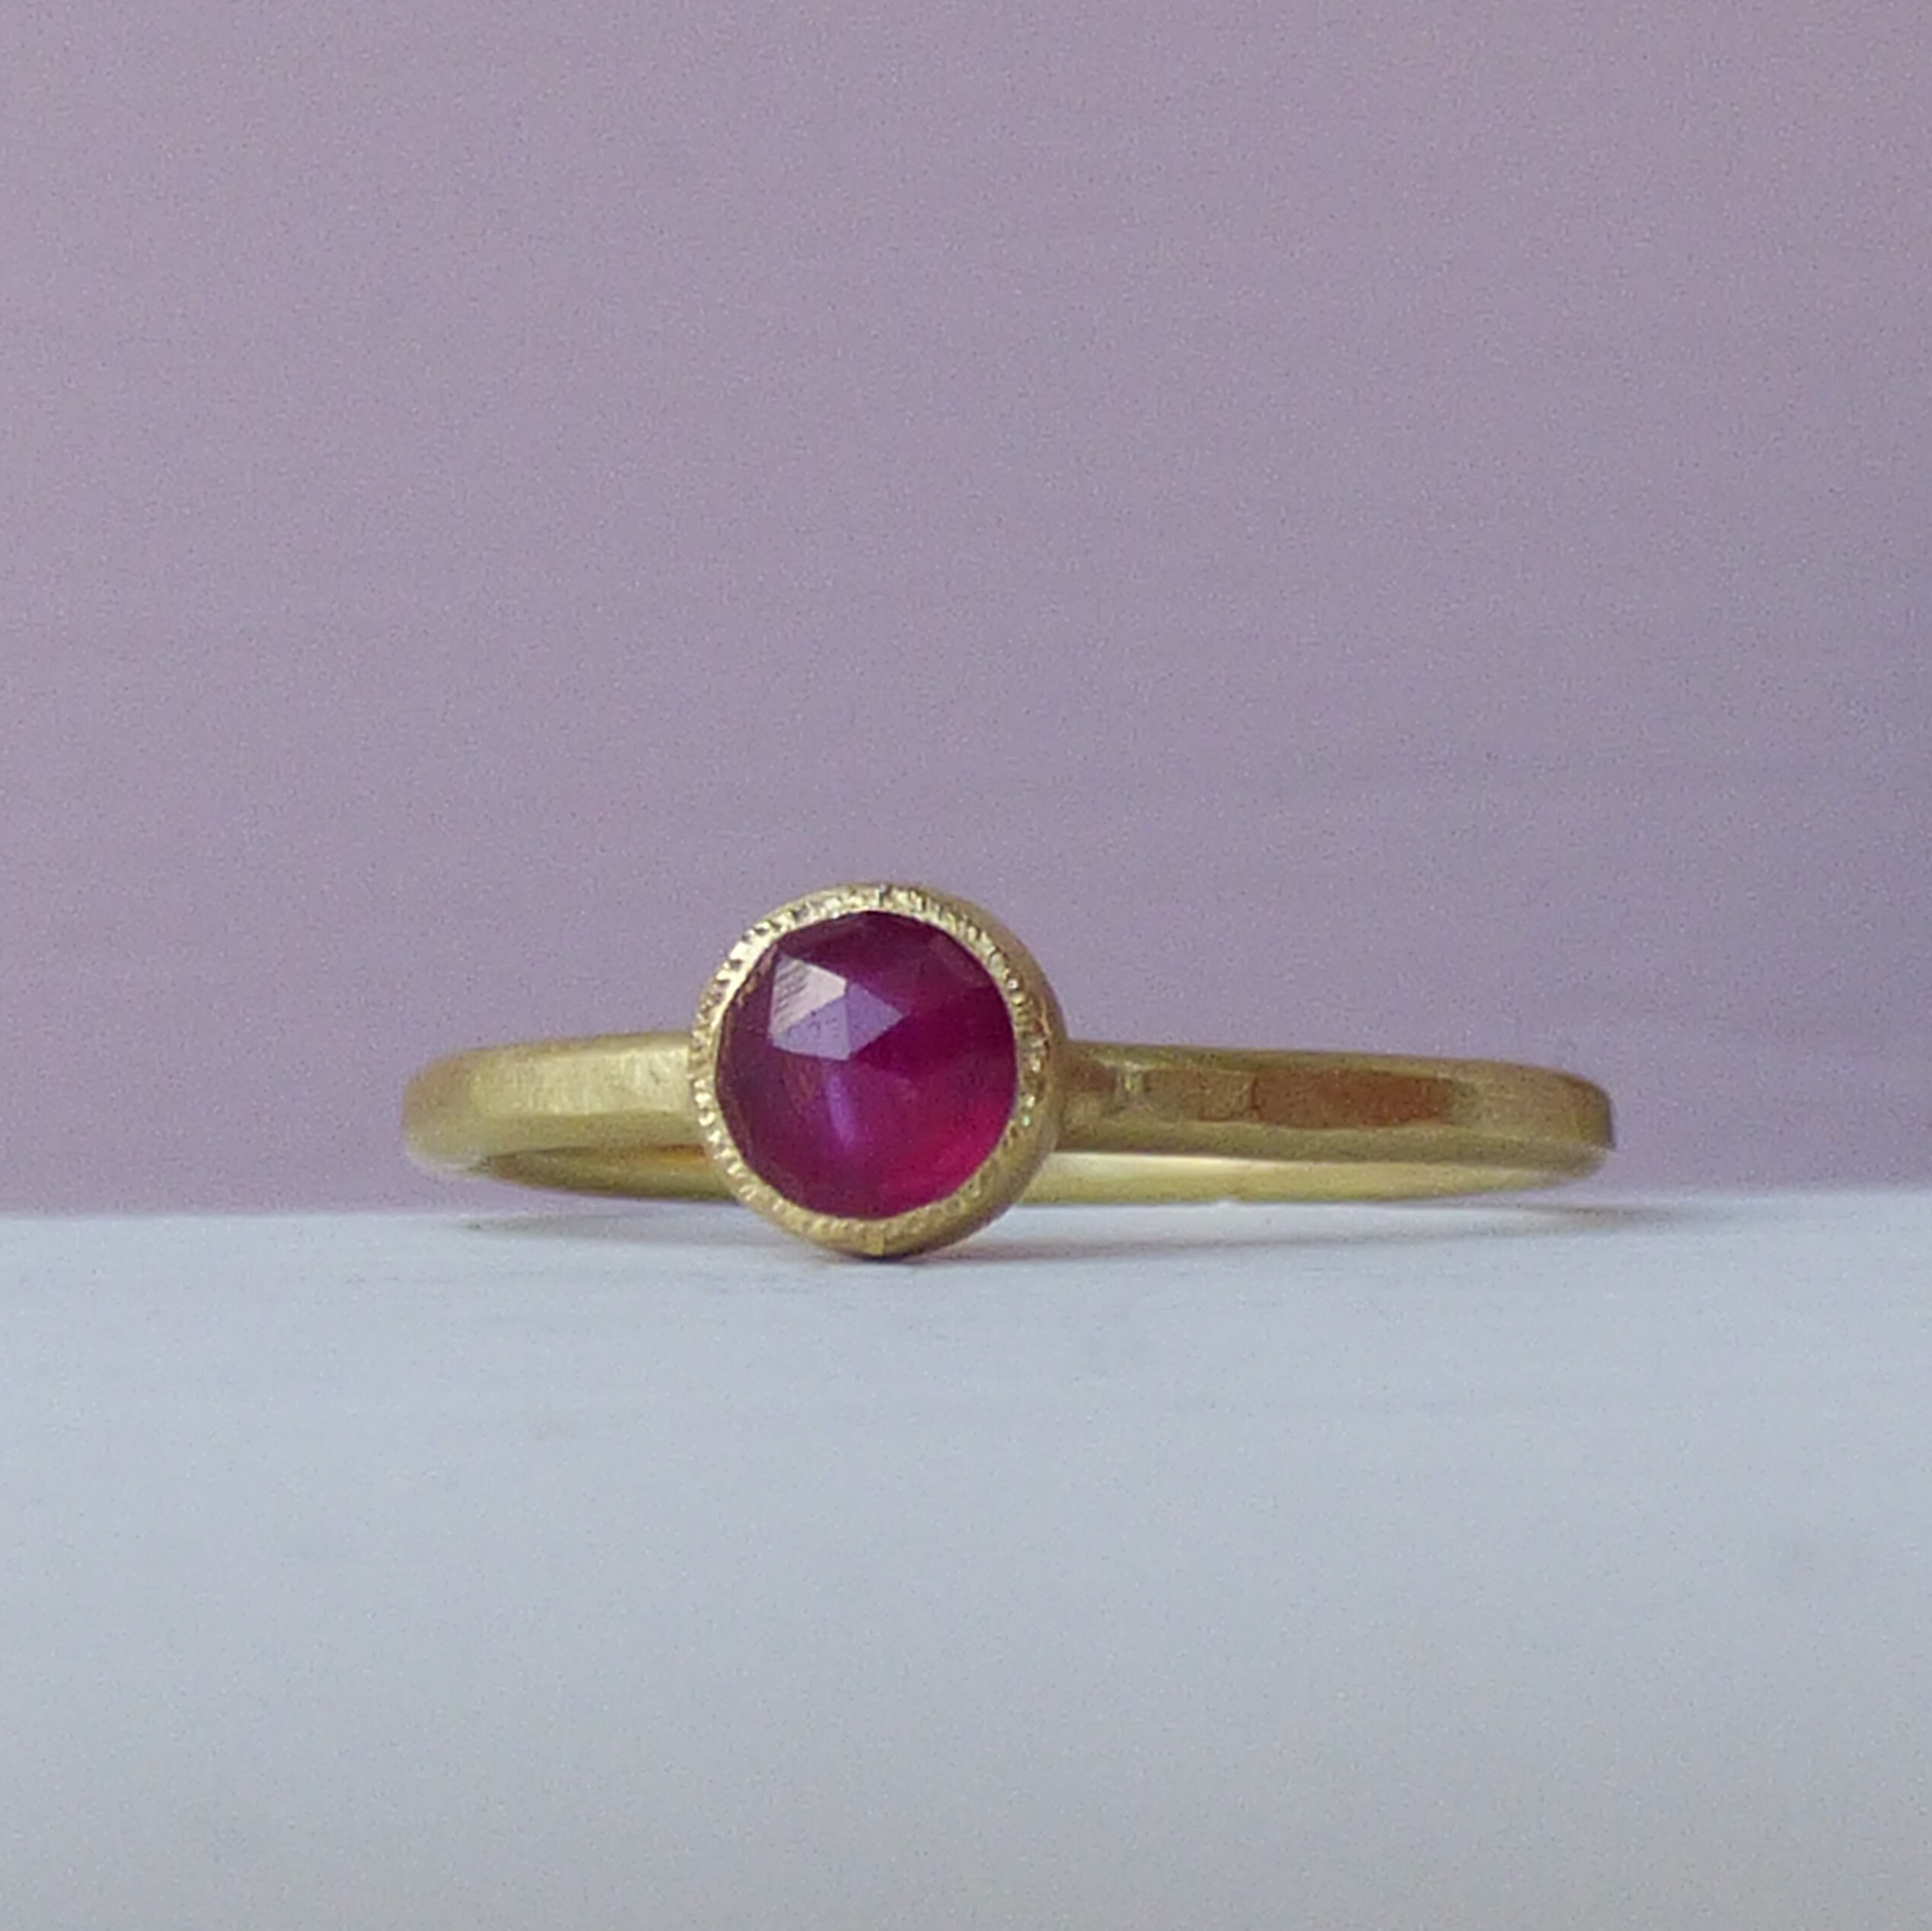 Ethical Engagement Ring Rose Cut Ruby Solitaire Engagement | Etsy